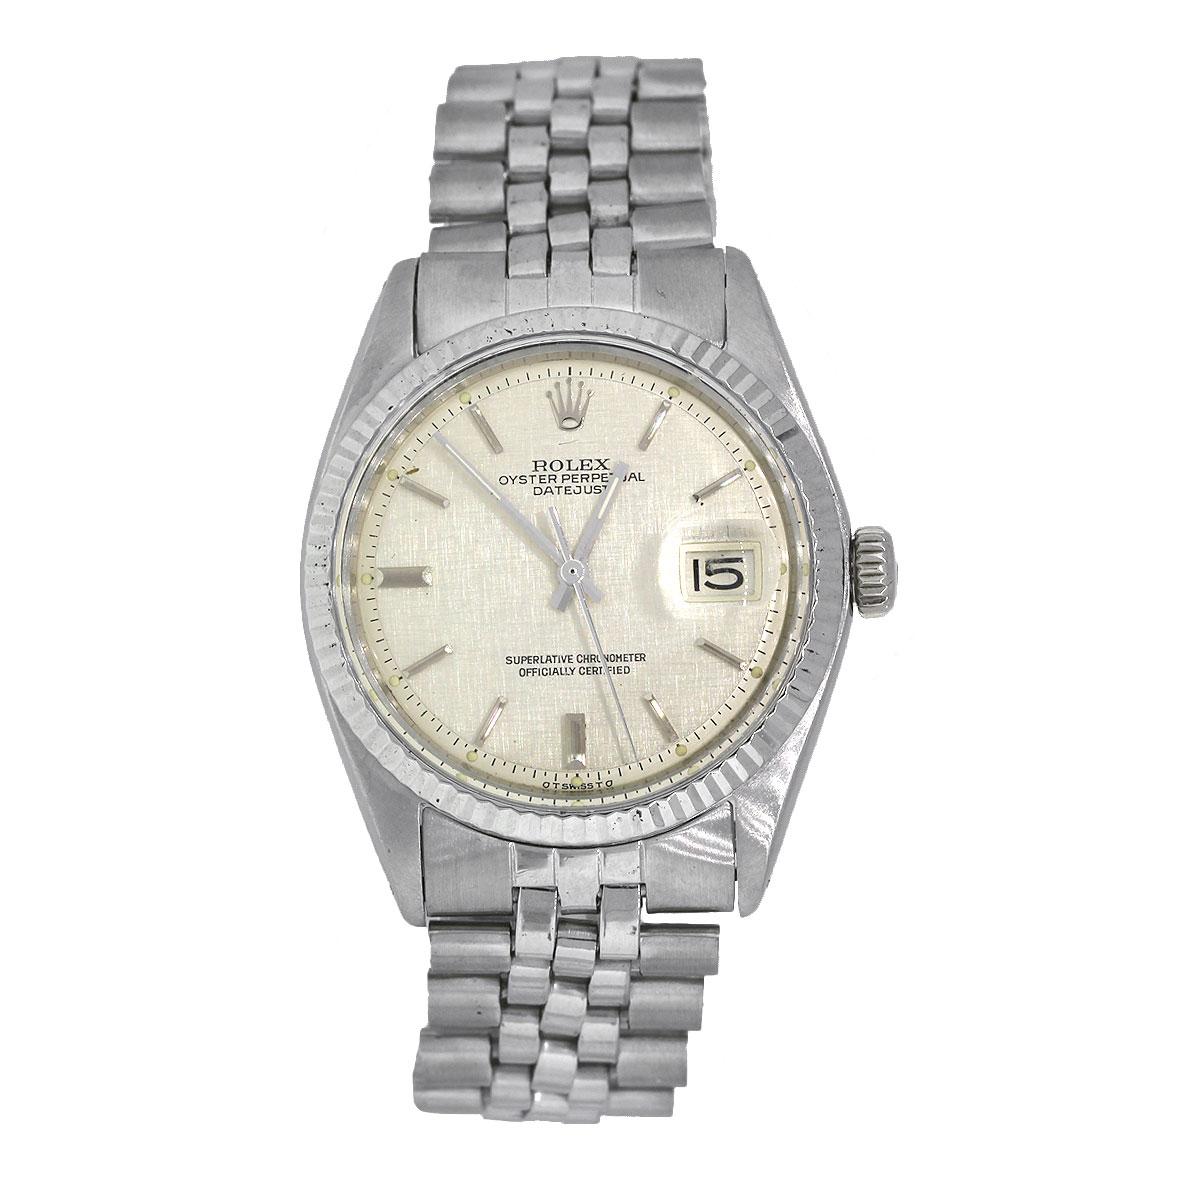 Brand: Rolex
MPN: 1501
Model: Datejust
Material: Stainless Steel
Dial: Silver linen pie pan dial with silver sticks and hands. Date can be found at 3 O’Clock
Bezel: Stainless Steel fluted bezel
Case Measurements: 36mm
Bracelet: Stainless steel